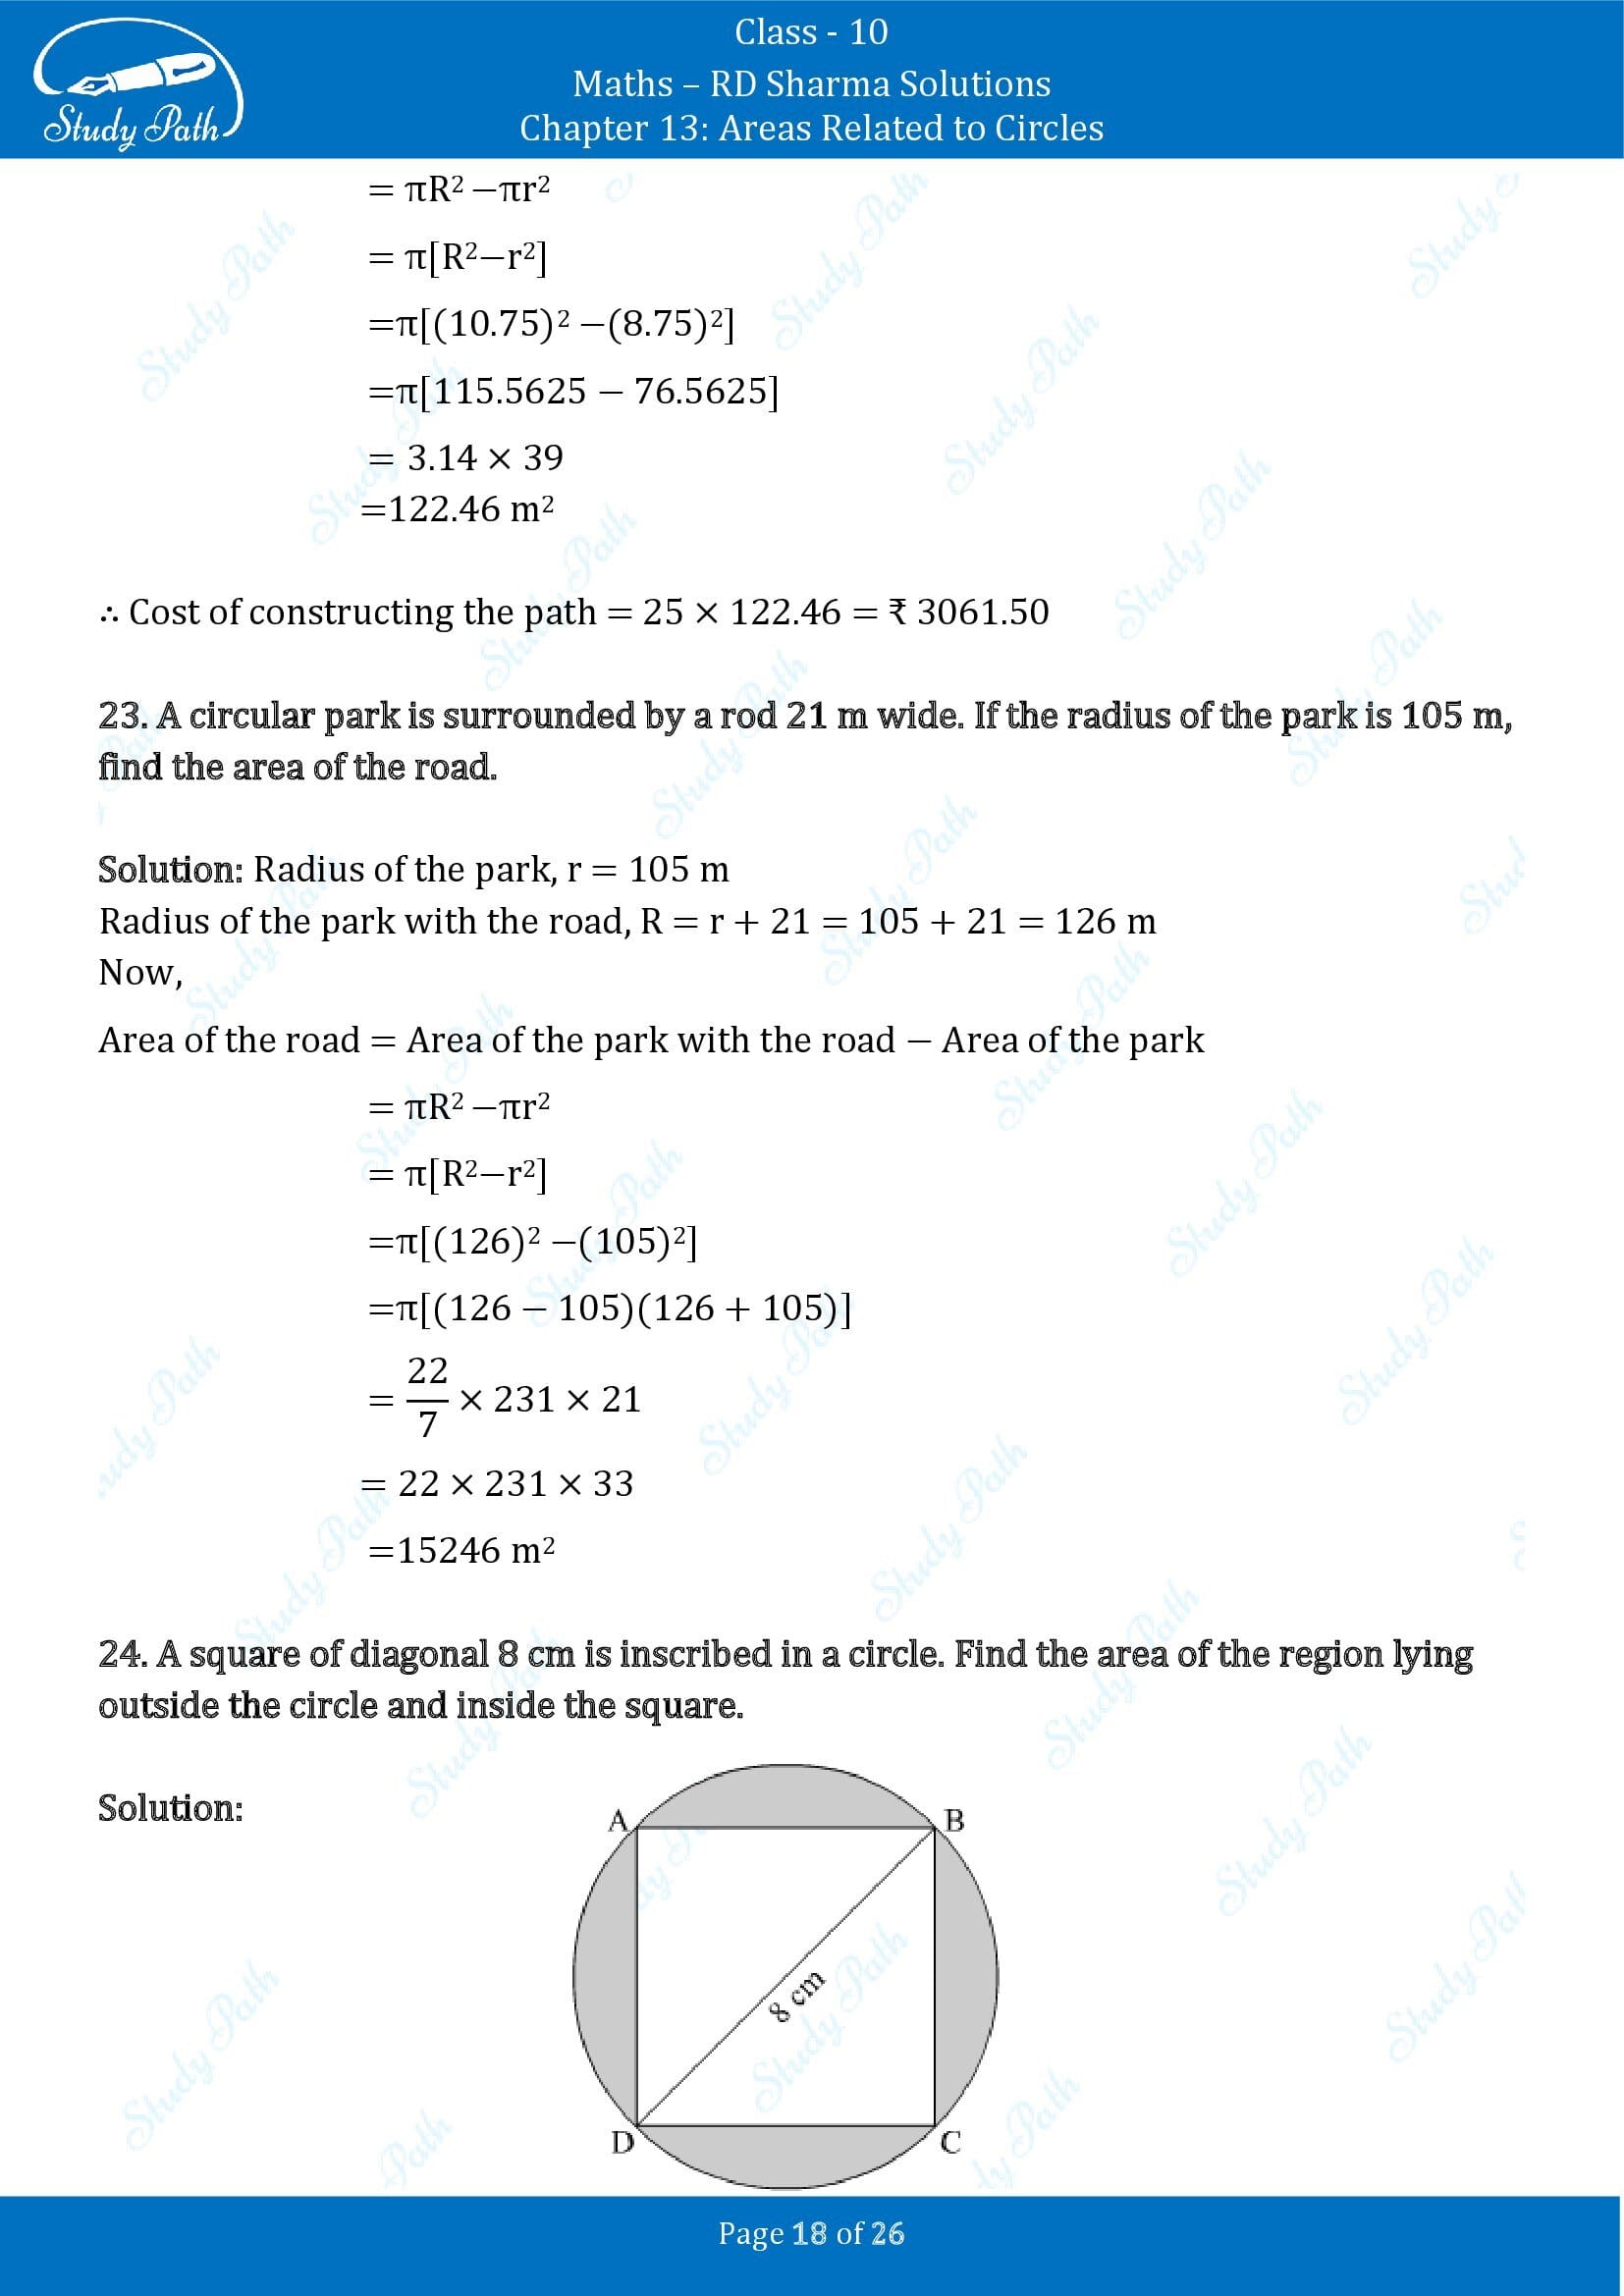 RD Sharma Solutions Class 10 Chapter 13 Areas Related to Circles Exercise 13.1 00018